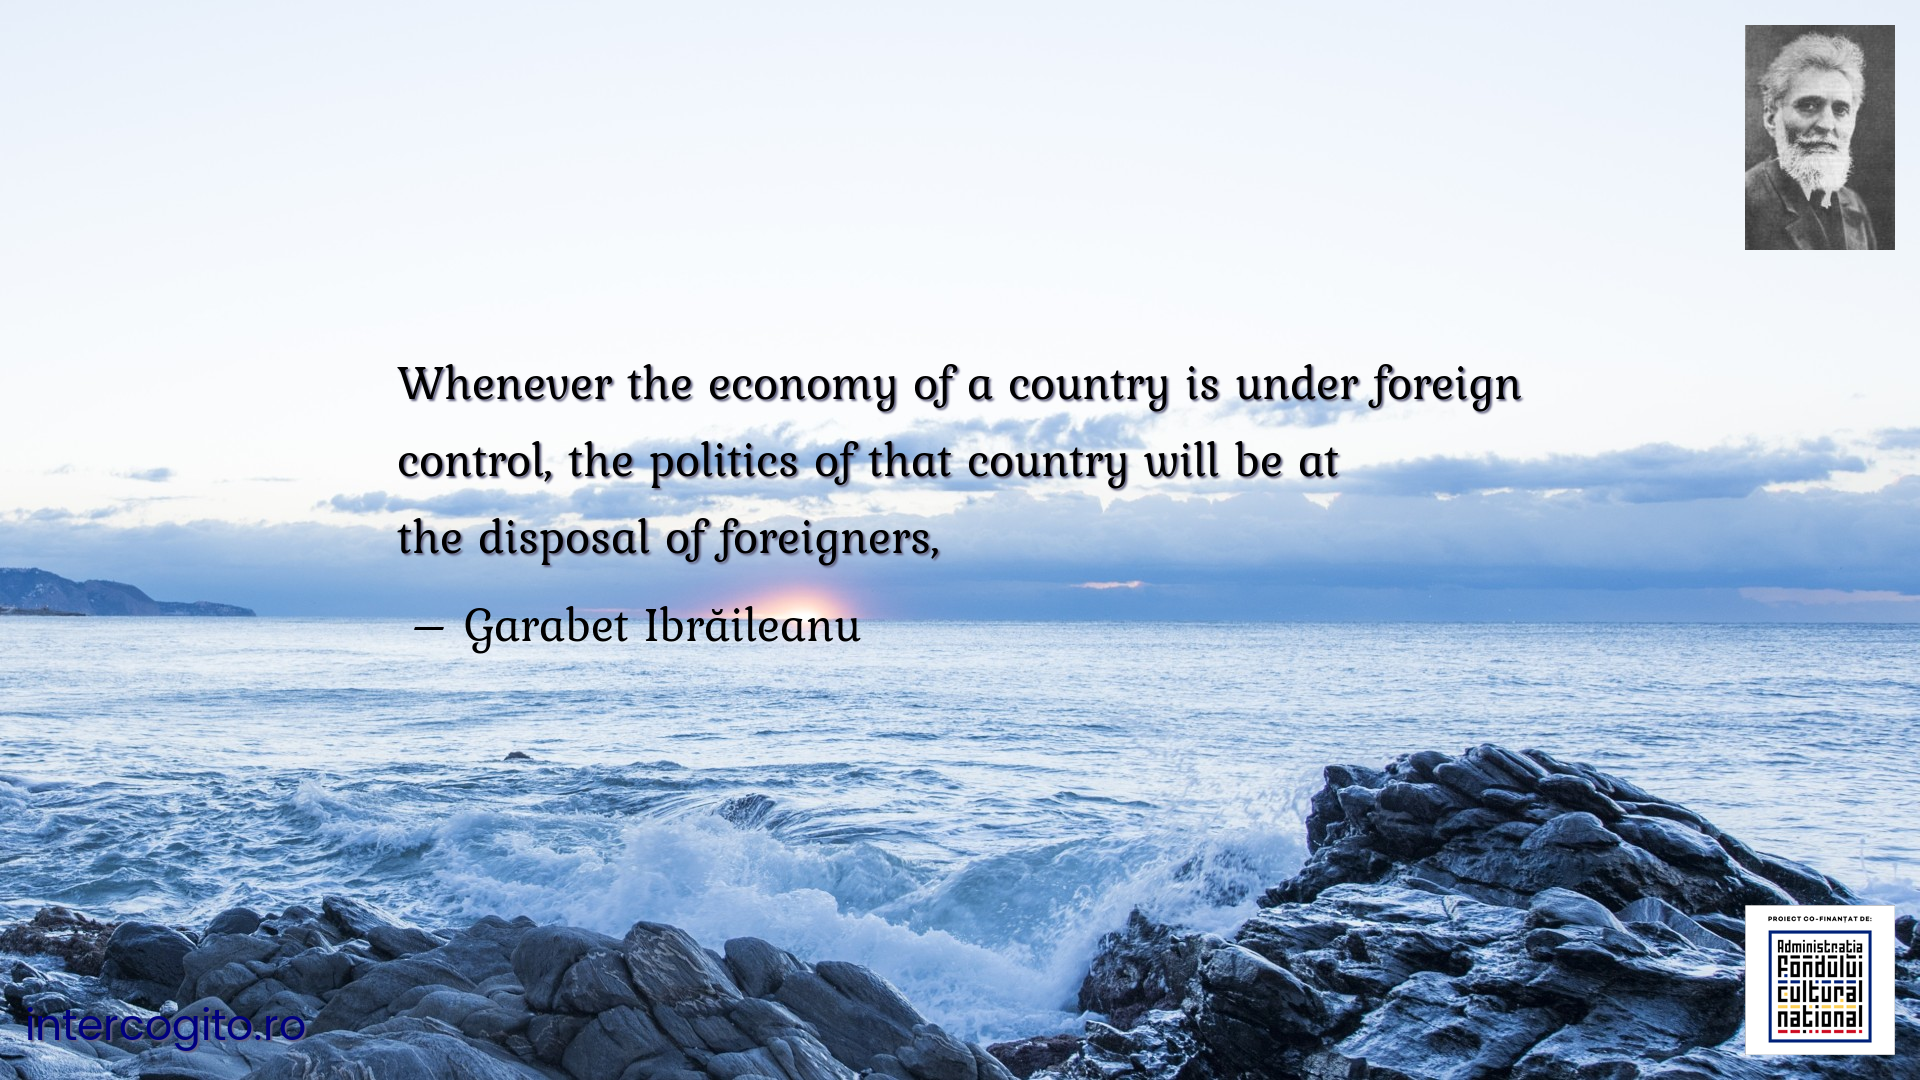 Whenever the economy of a country is under foreign control, the politics of that country will be at the disposal of foreigners,